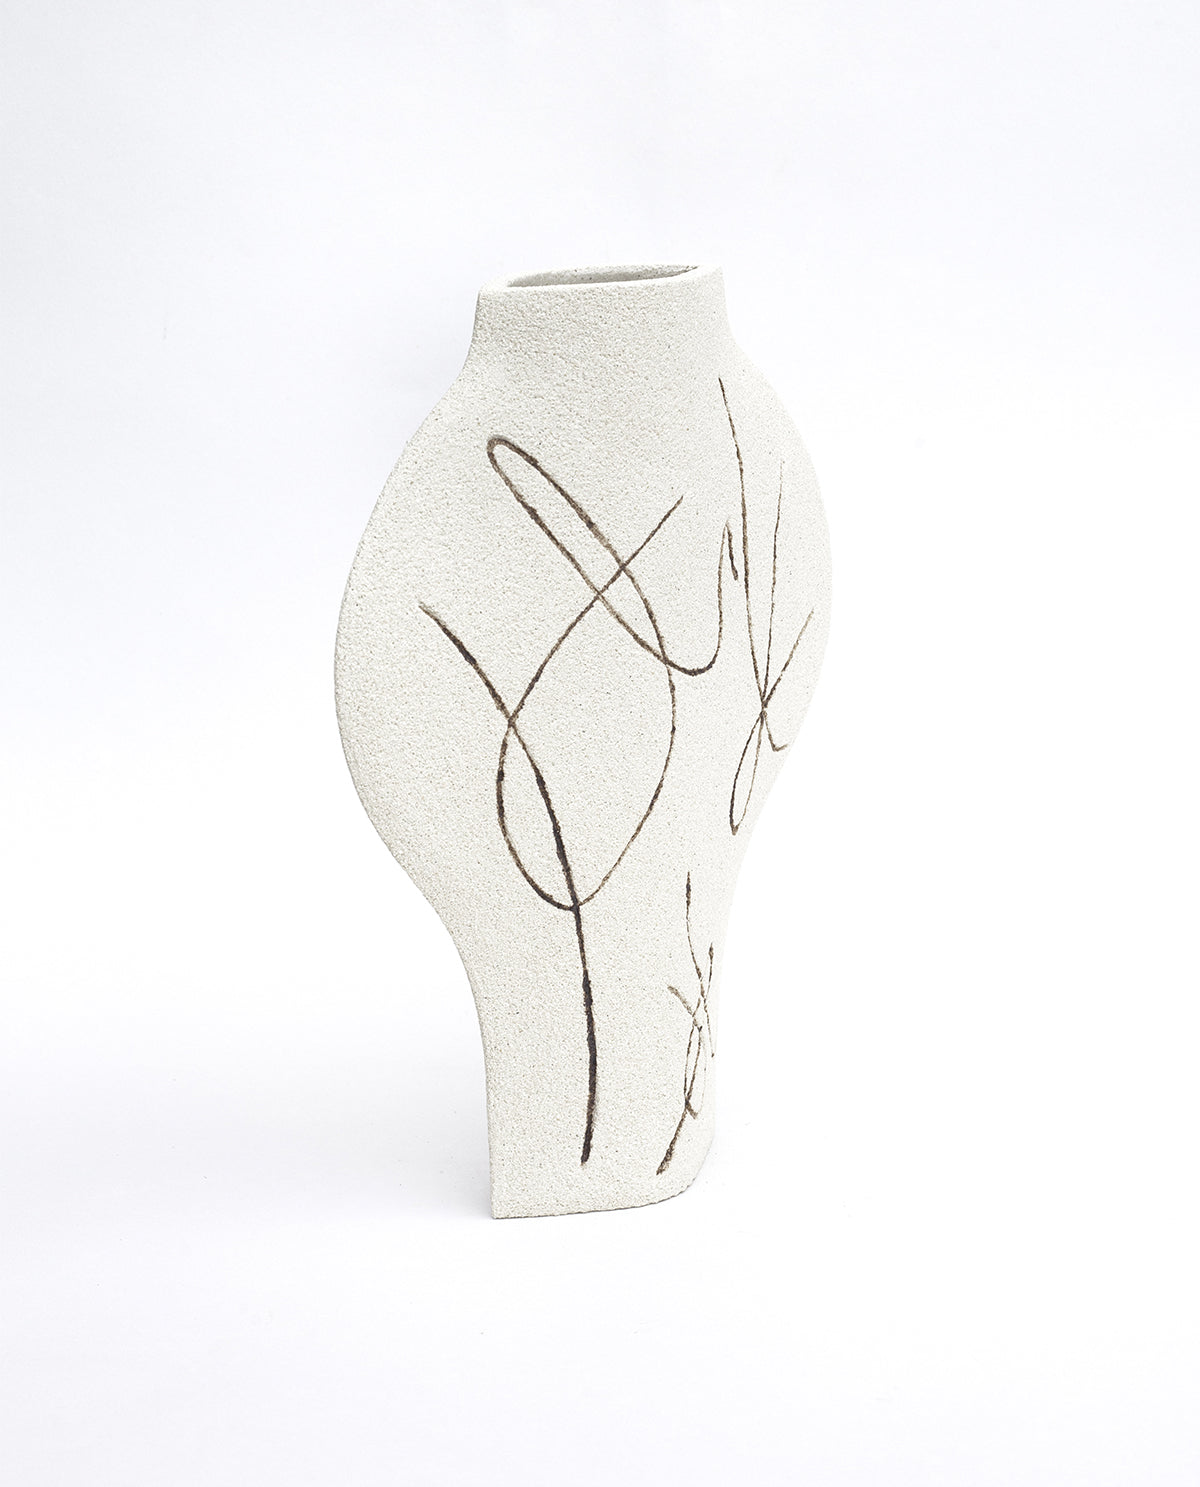 Hand-painted abstract vase by INI CERAMIQUE with carved patterns and textured finish